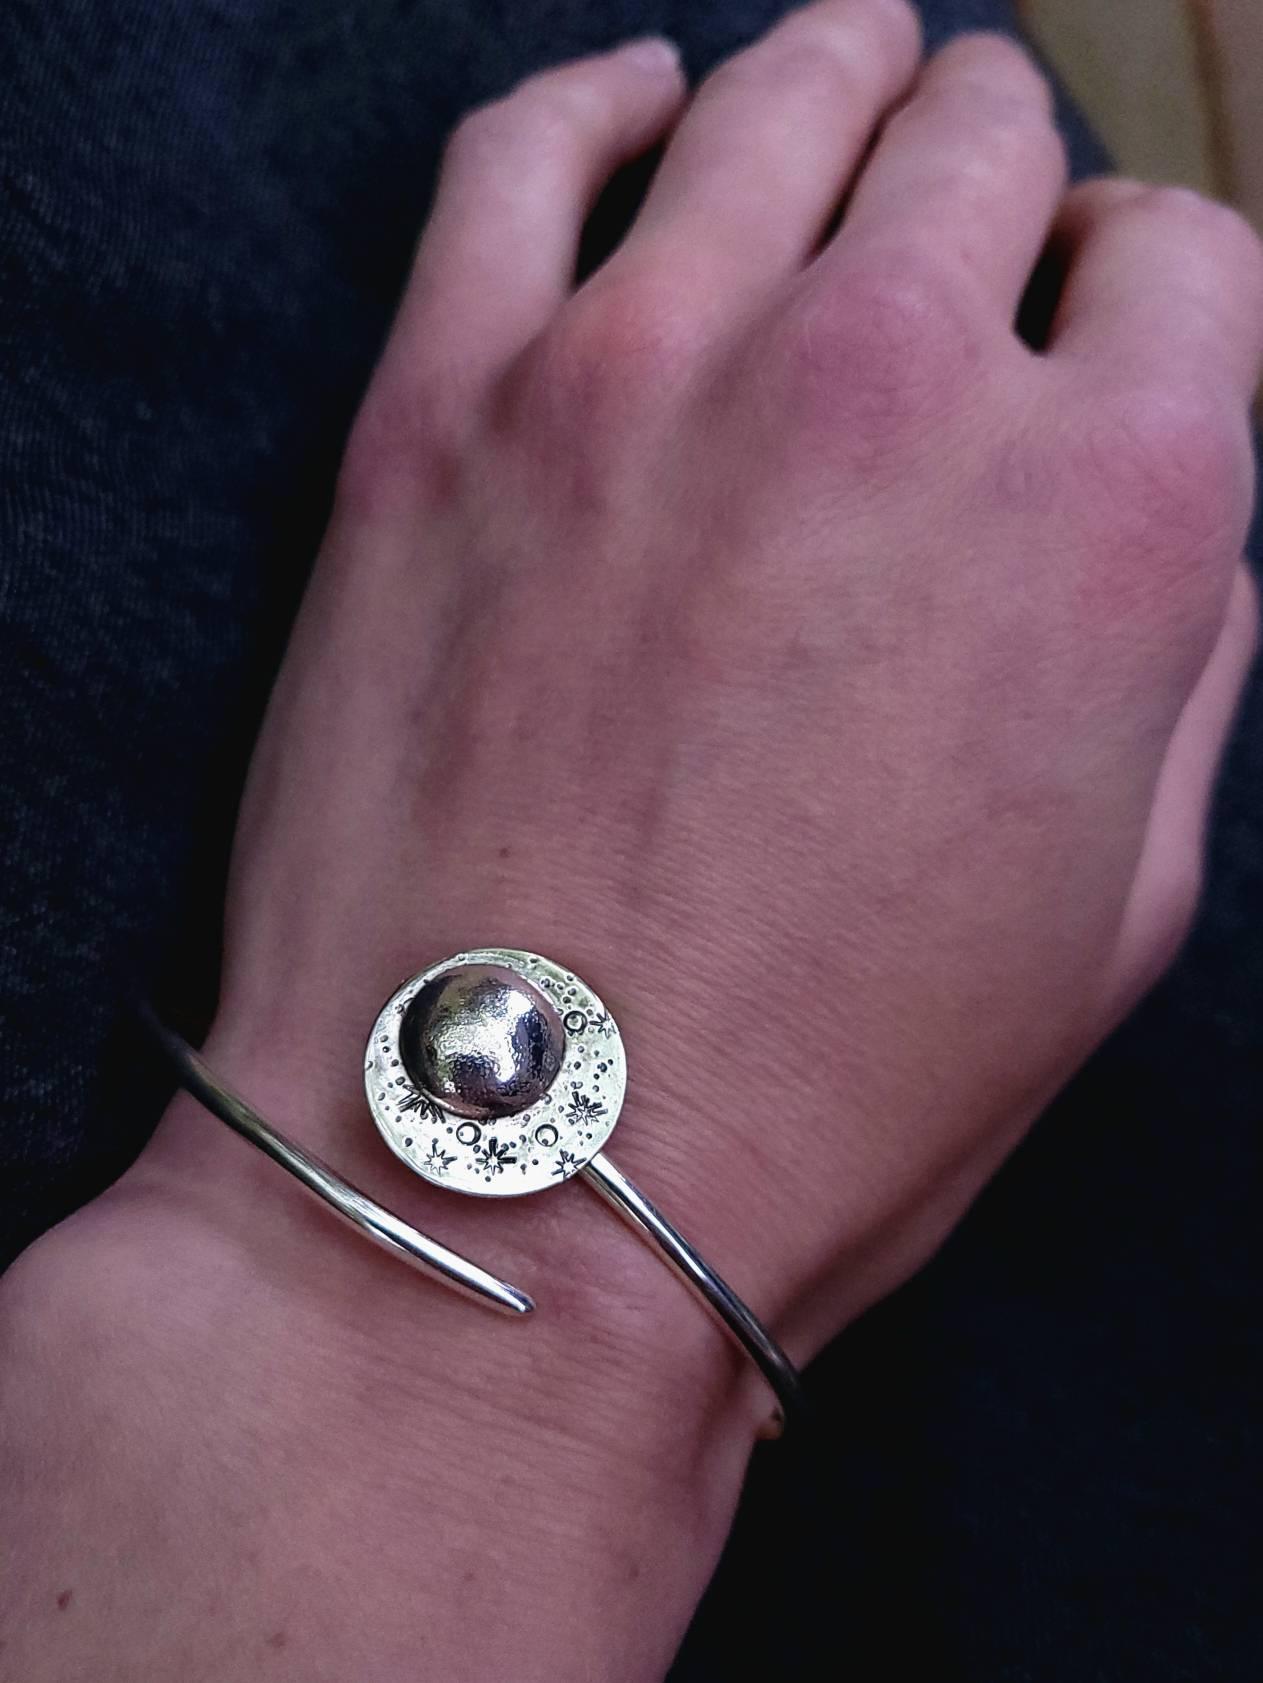 Reflections Moon Bracelet - Symbols of Strength & Resilience - Jaclyn Nicole